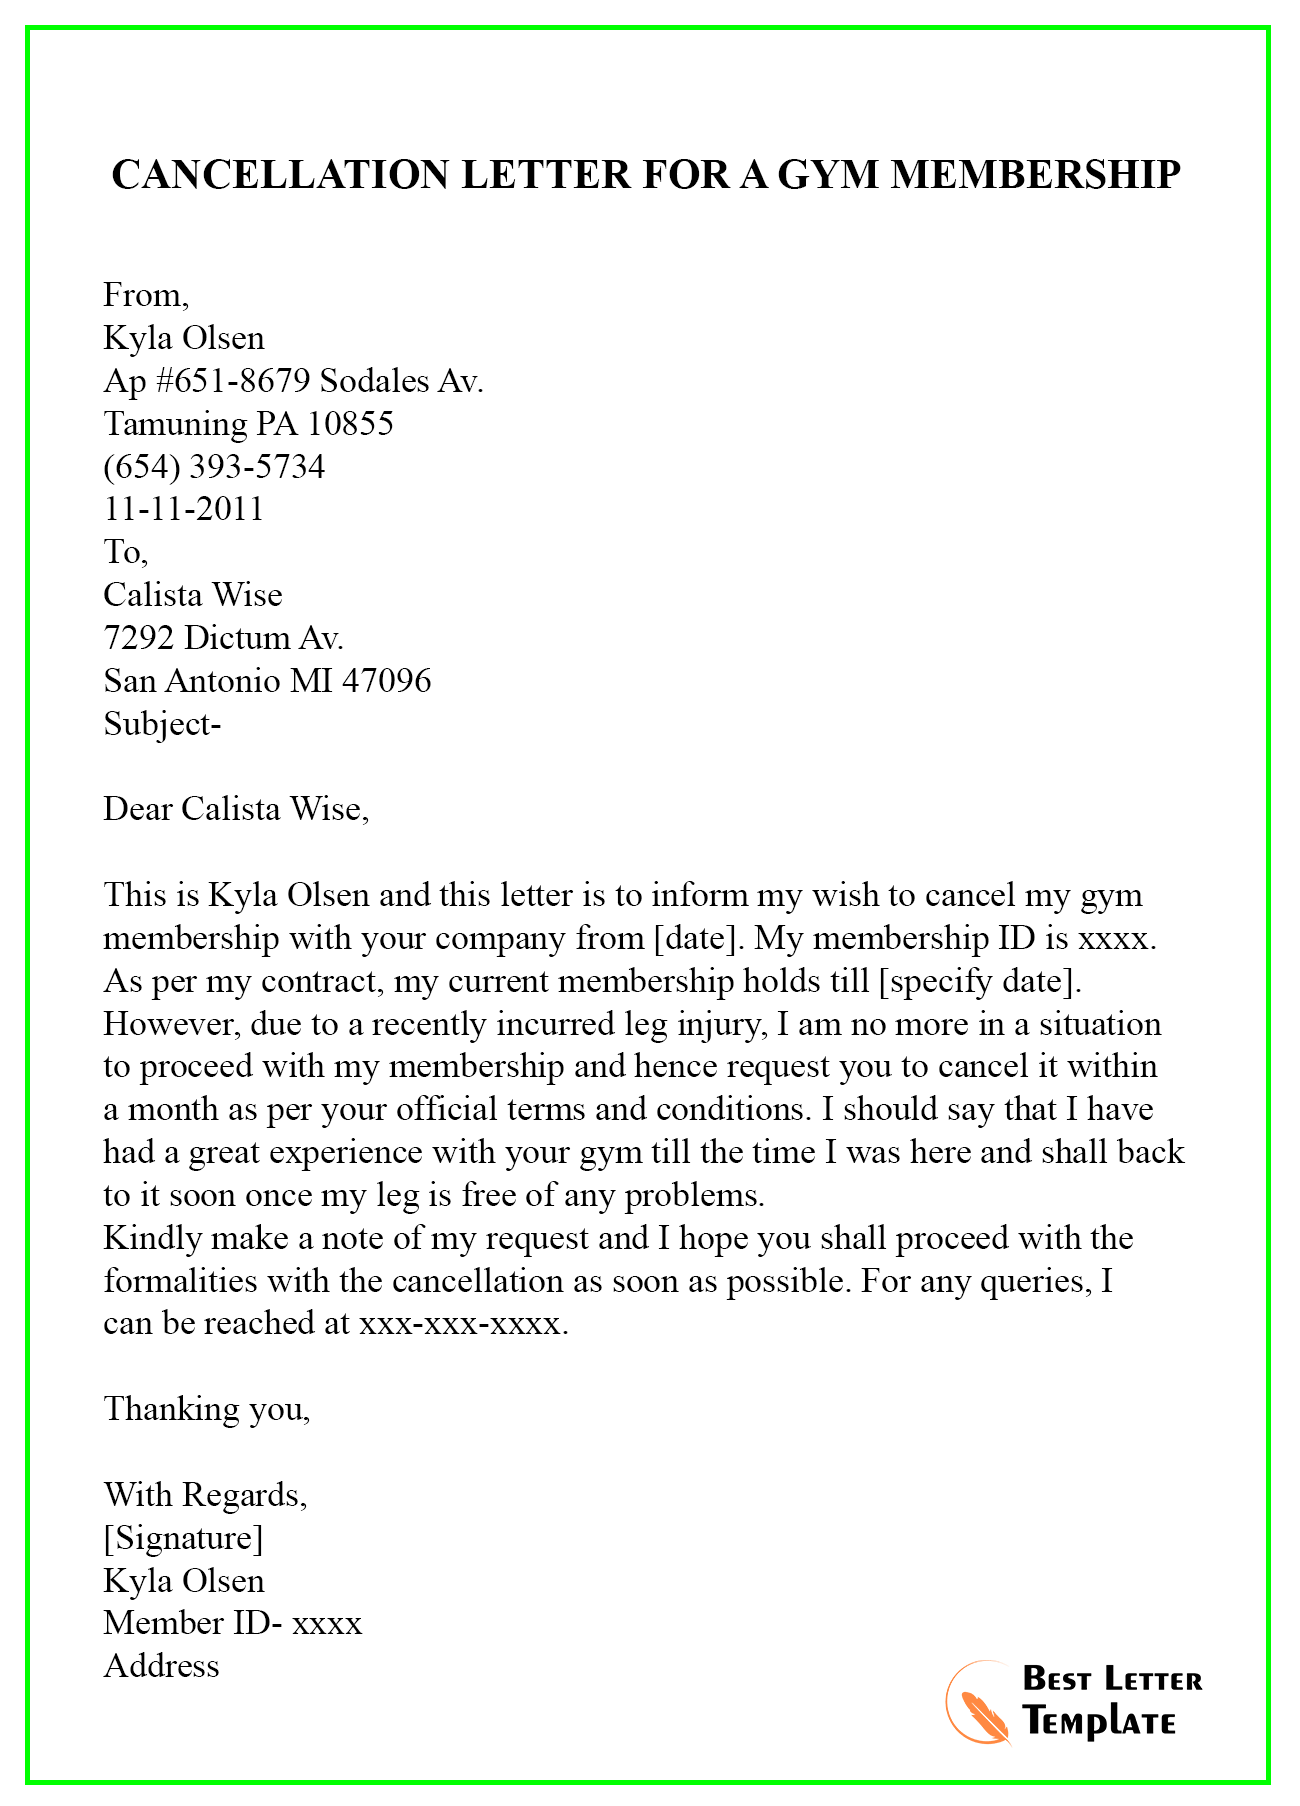 CANCELLATIONLETTERFORAGYMMEMBERSHIP Best Letter Template